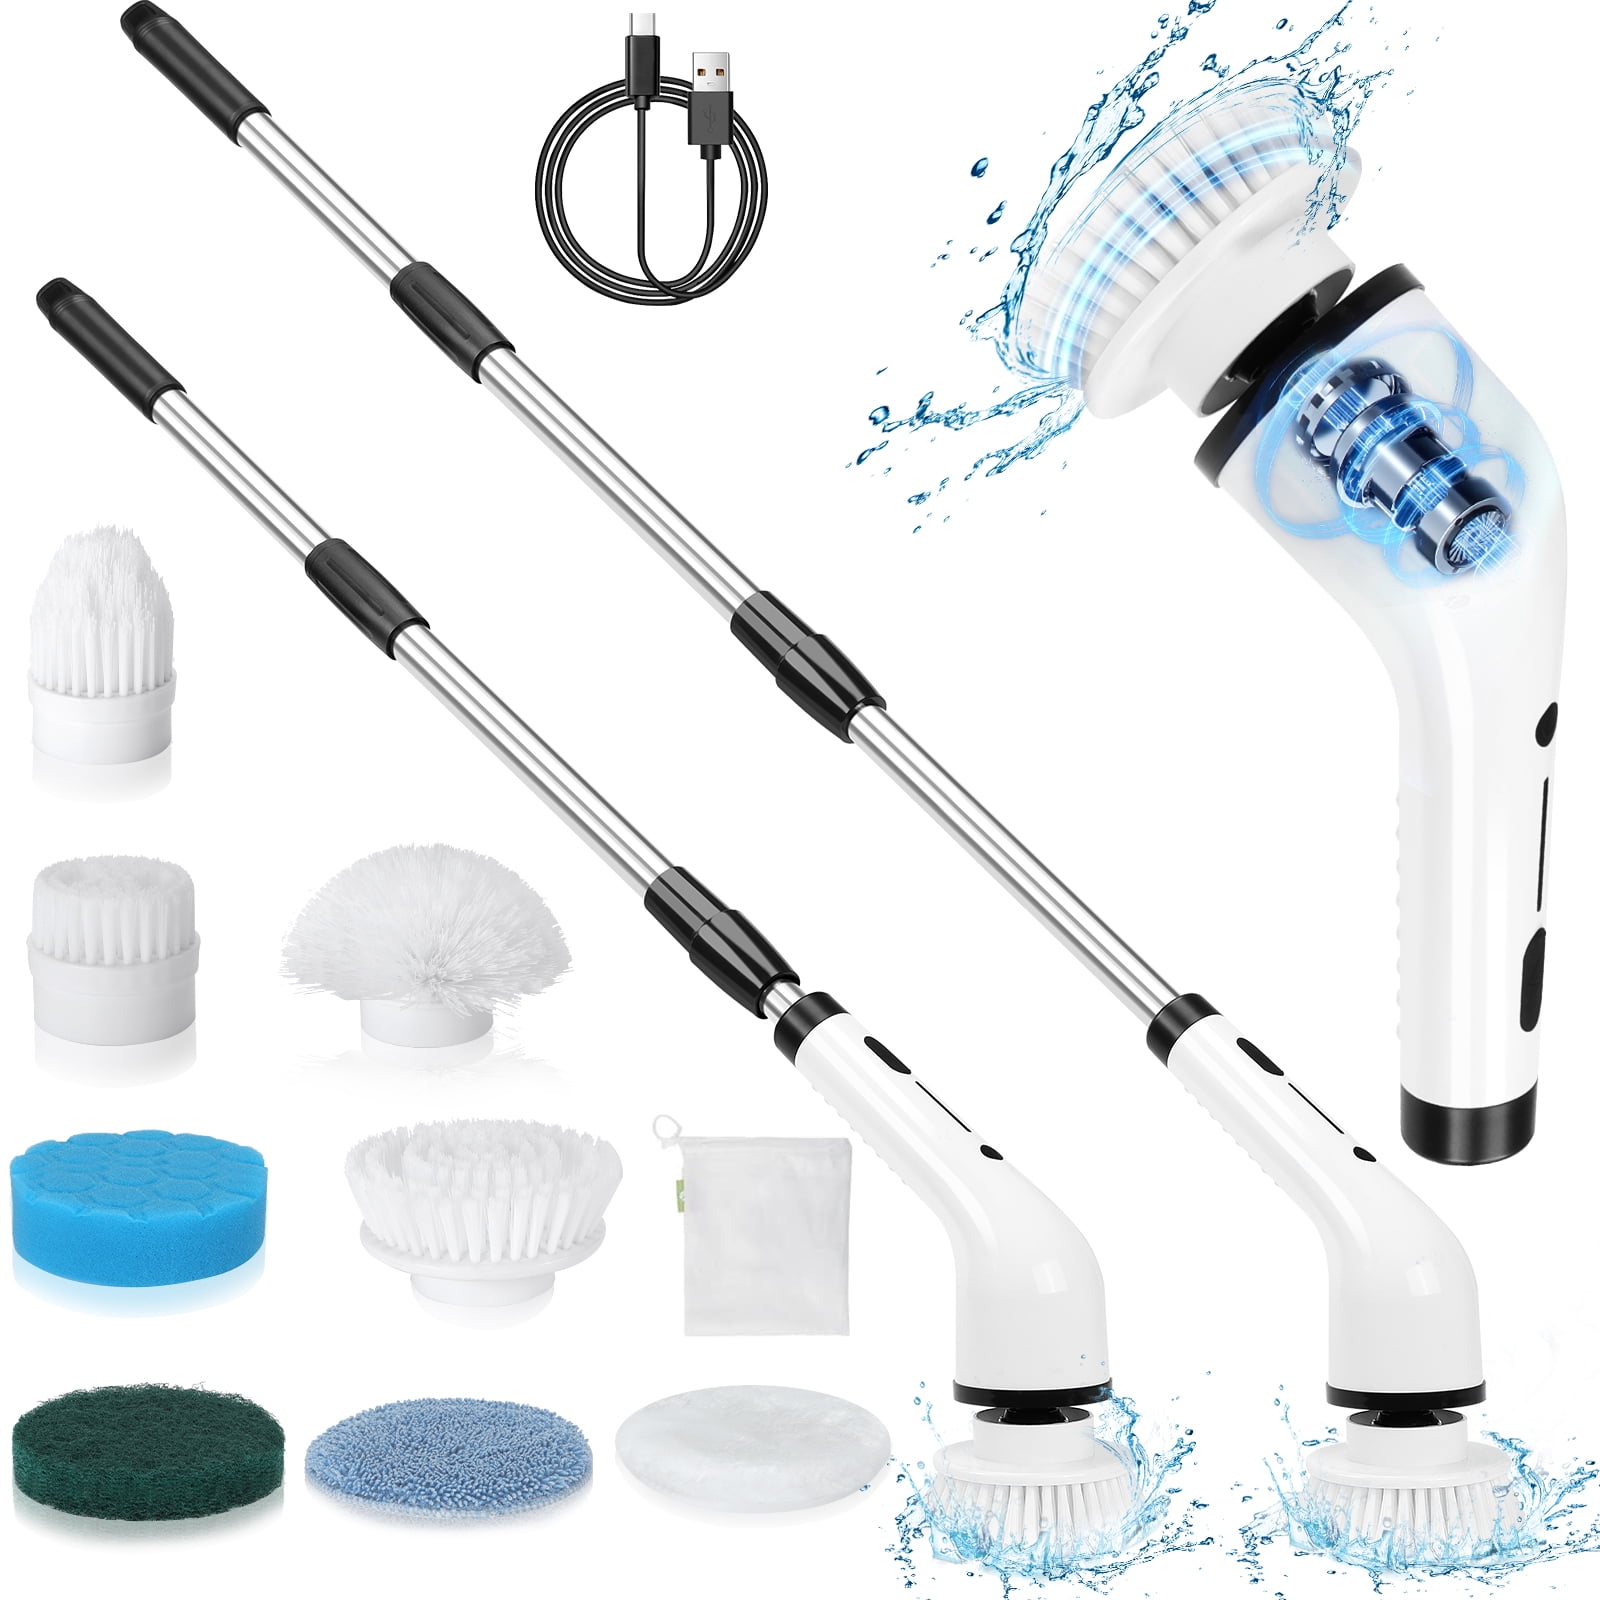  Cordless Electric Spin Scrubber,Cleaning Brush Scrubber for  Home, 400RPM/Mins-8 Replaceable Brush Heads-90Mins Work Time,3 Adjustable  Size,2 Adjustable Speeds for Bathroom Shower Bathtub Glass Car : Industrial  & Scientific